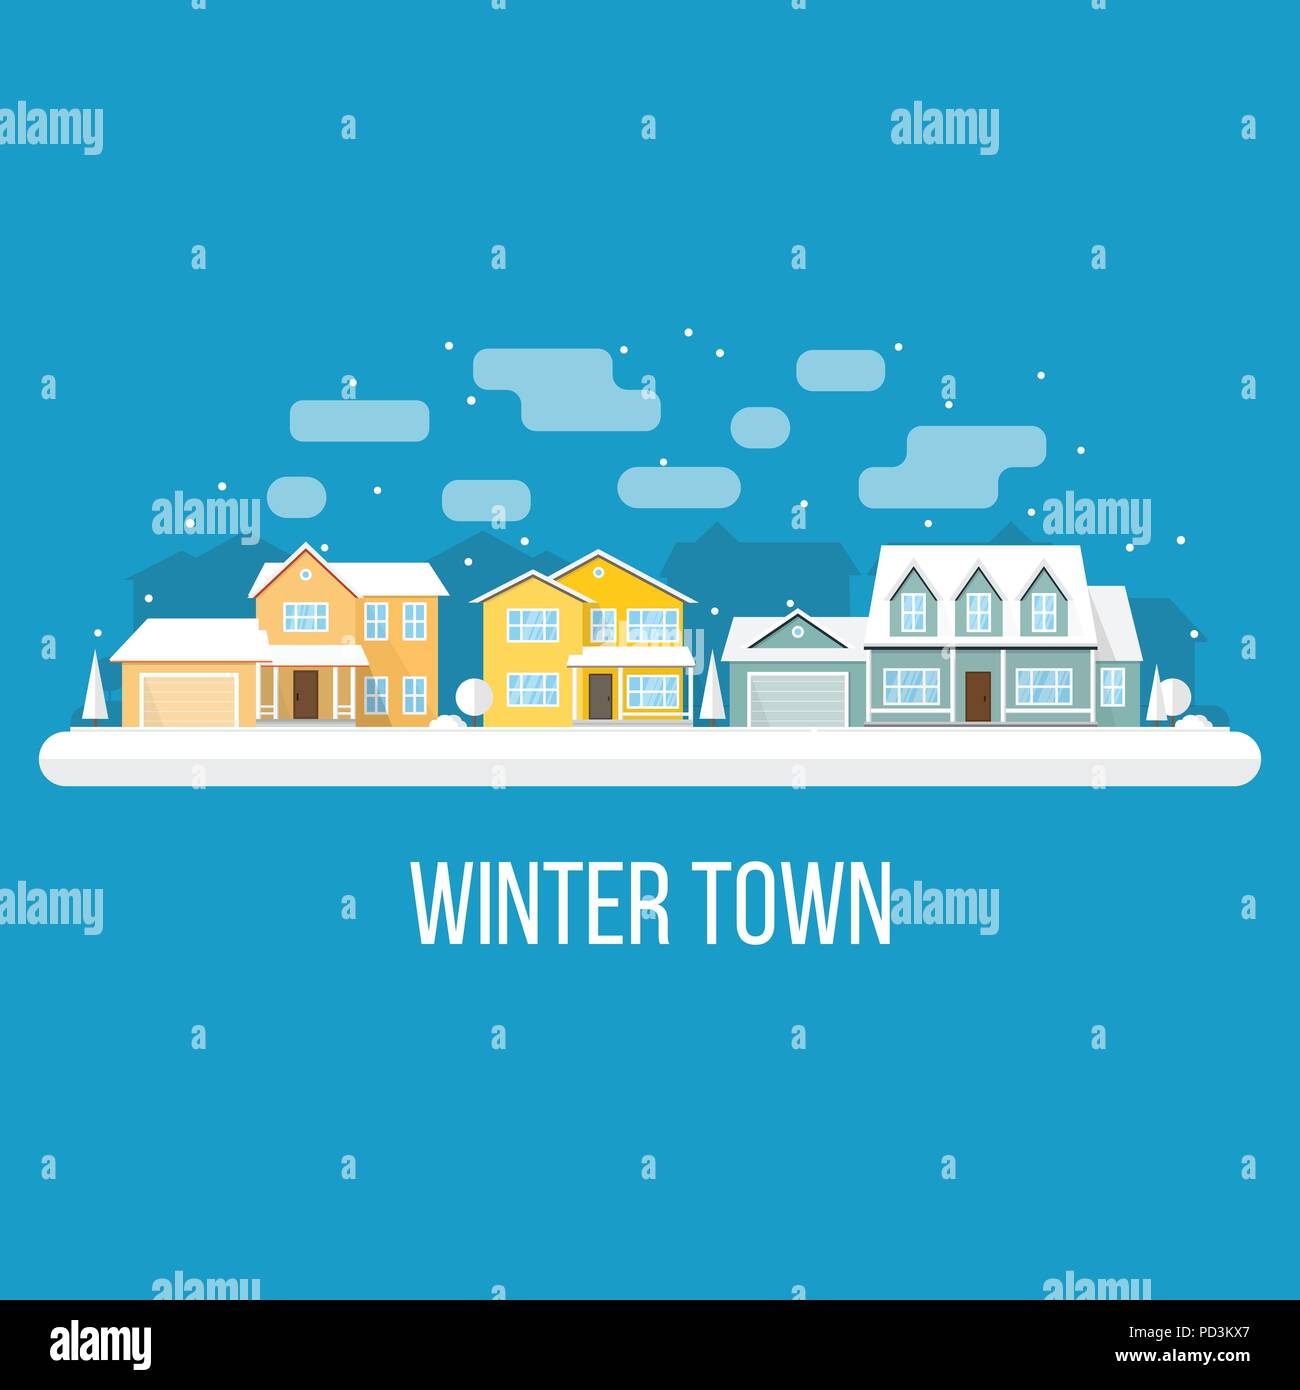 Winter town landscape. Vector illustration. Xmas design for invitations, banners and flyers. Stock Vector